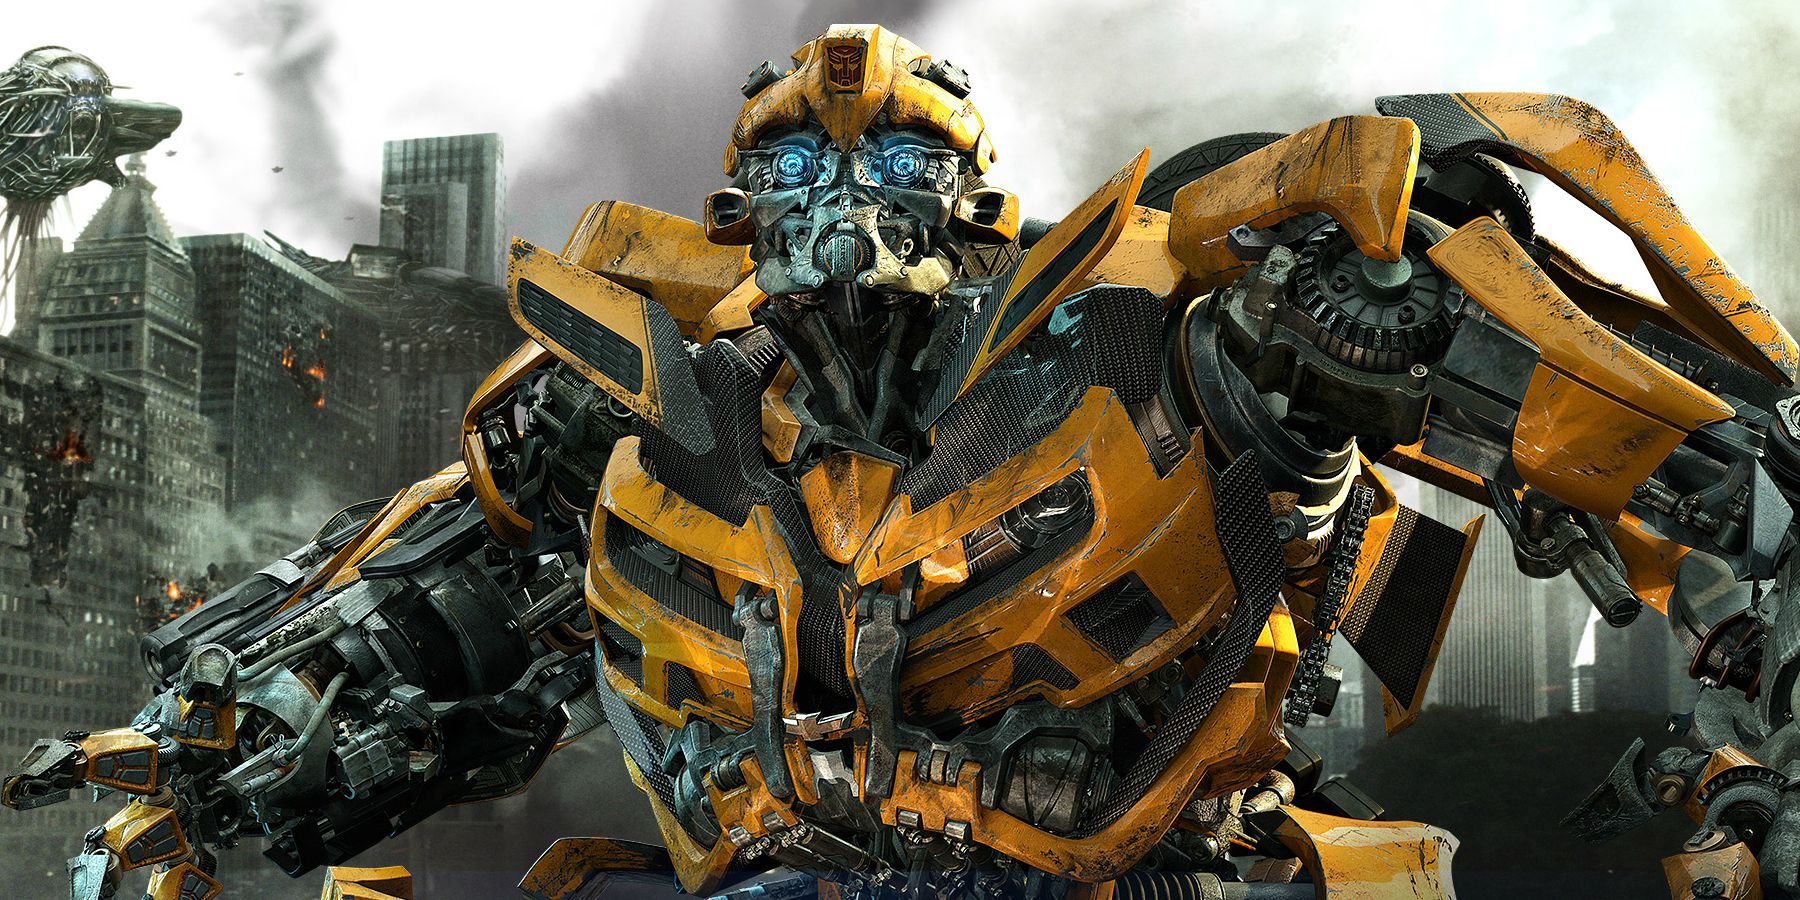 Transformers Dark of the Moon Bumblebee Poster